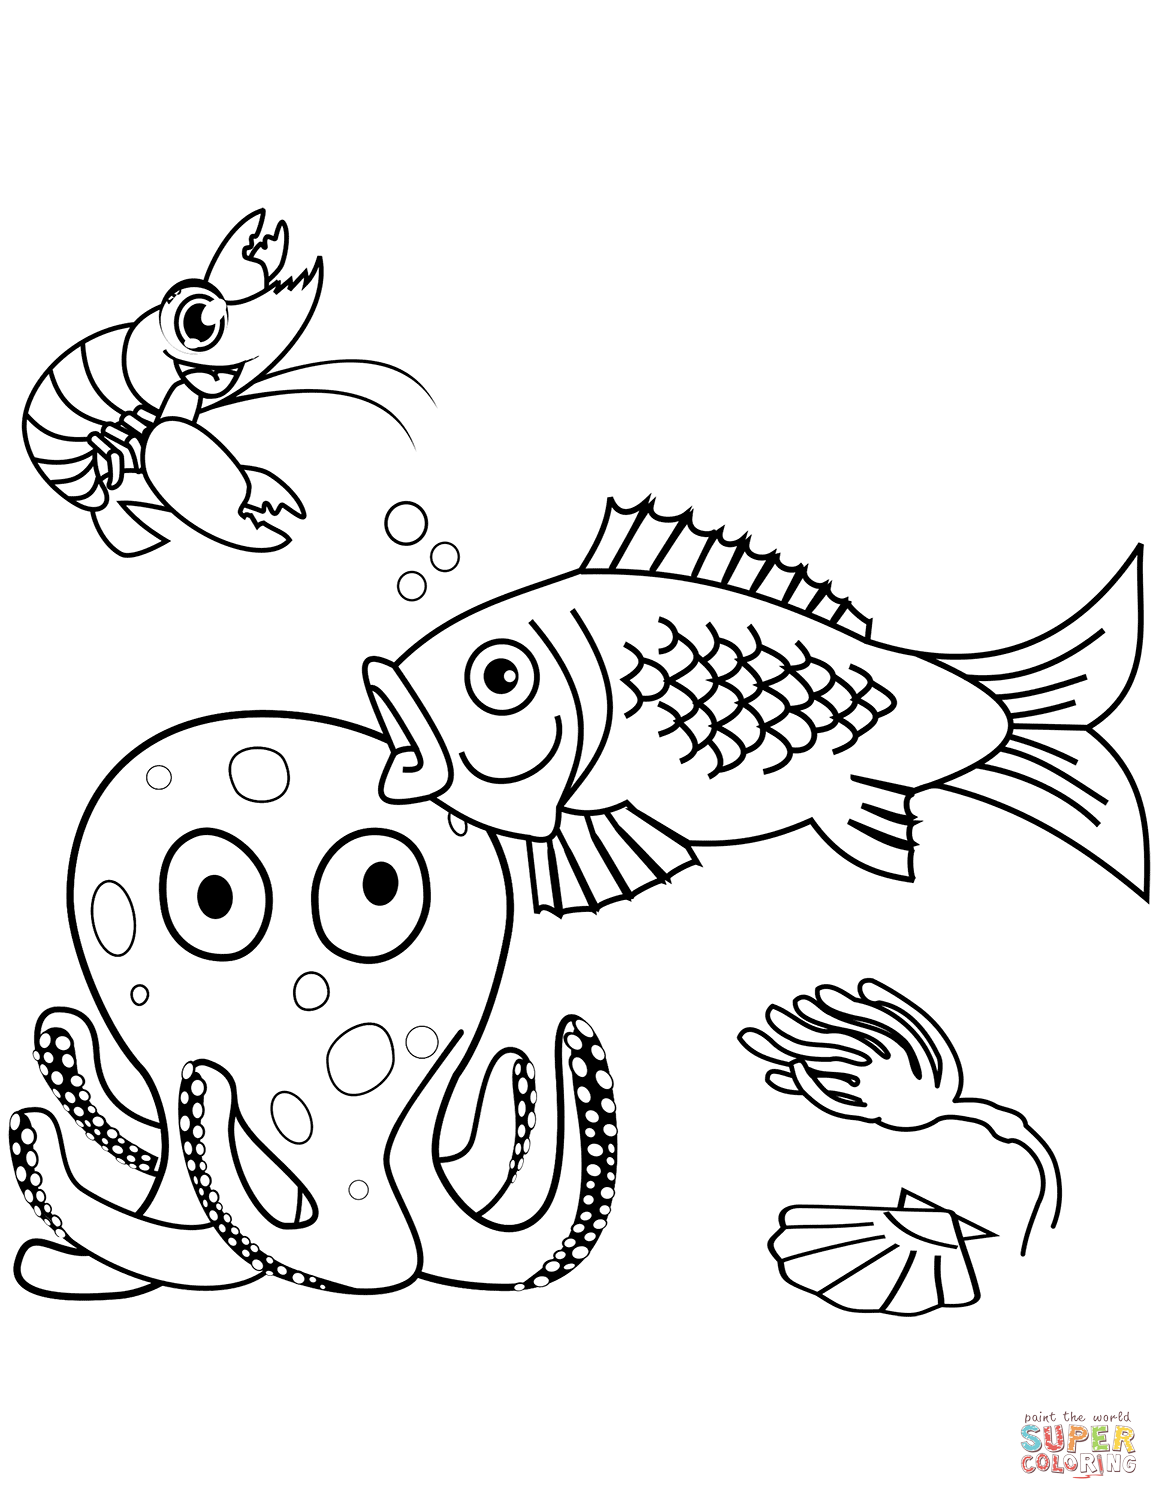 Sea life coloring page free printable coloring pages